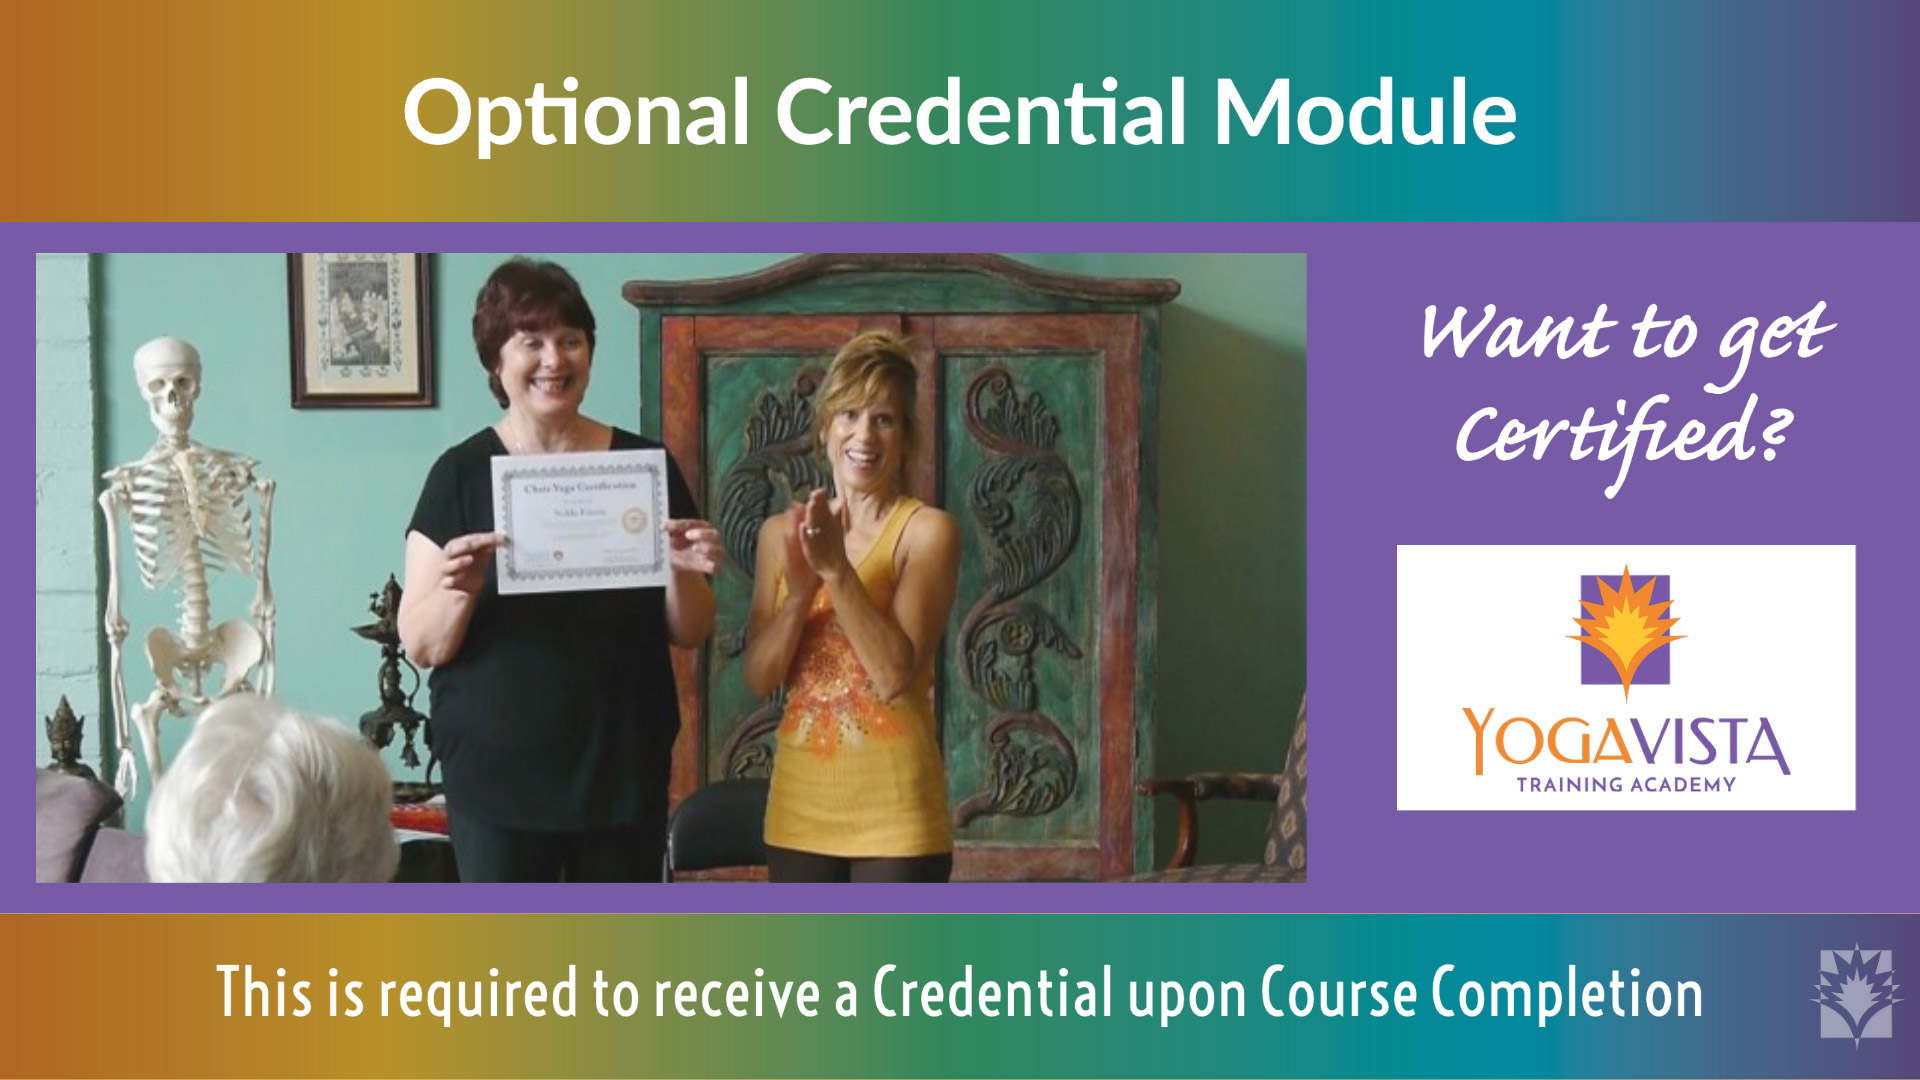 Yoga Vista Academy Certification and Credential Module